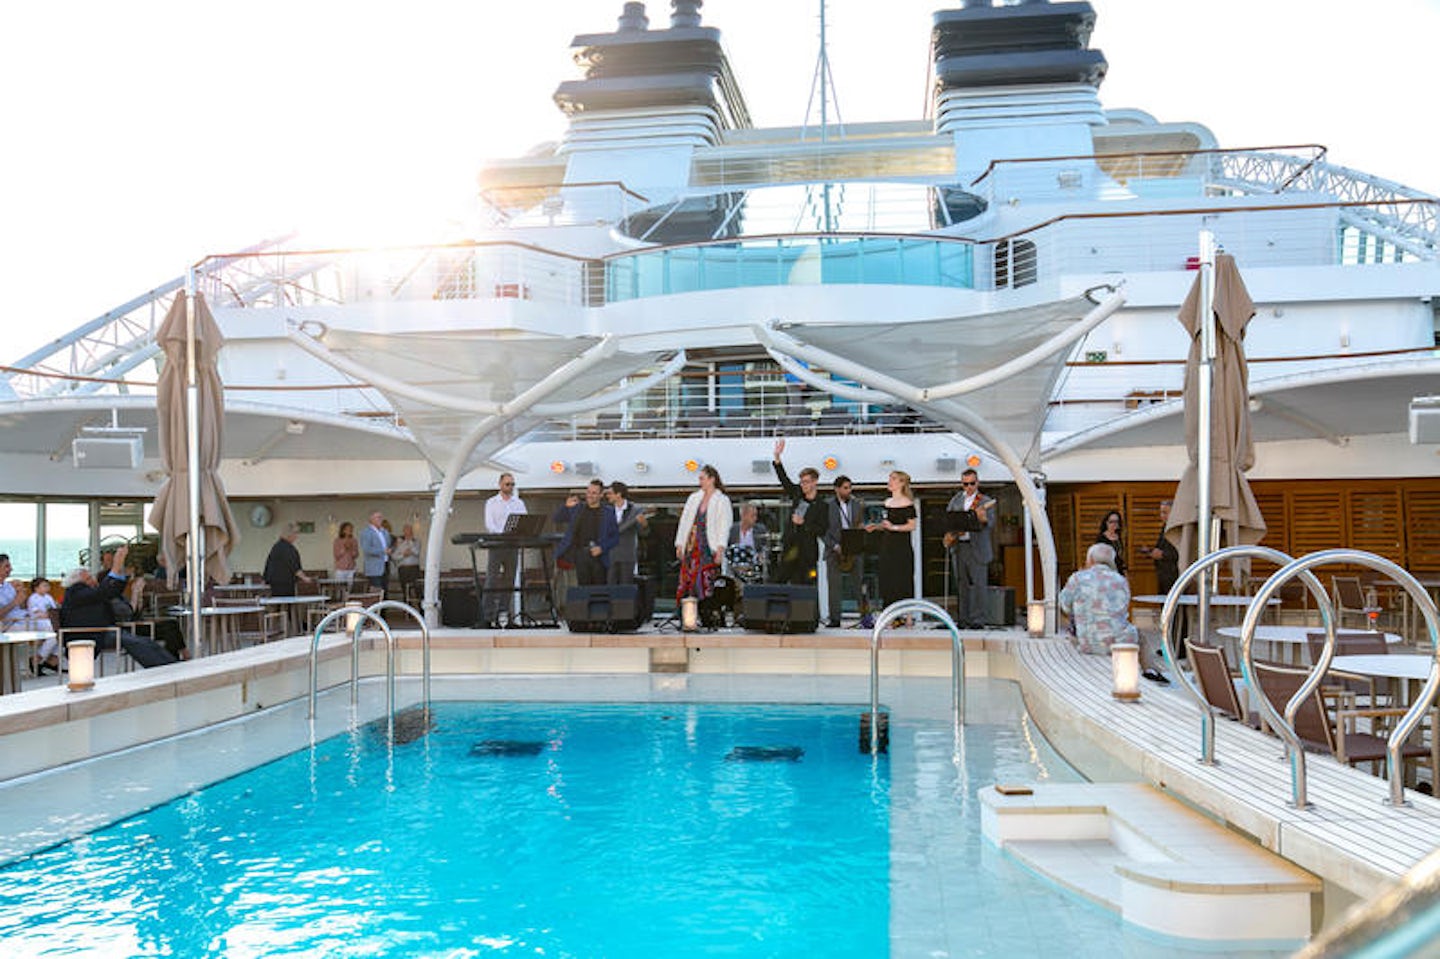 End of Cruise Celebration Dance Party on Seabourn Ovation